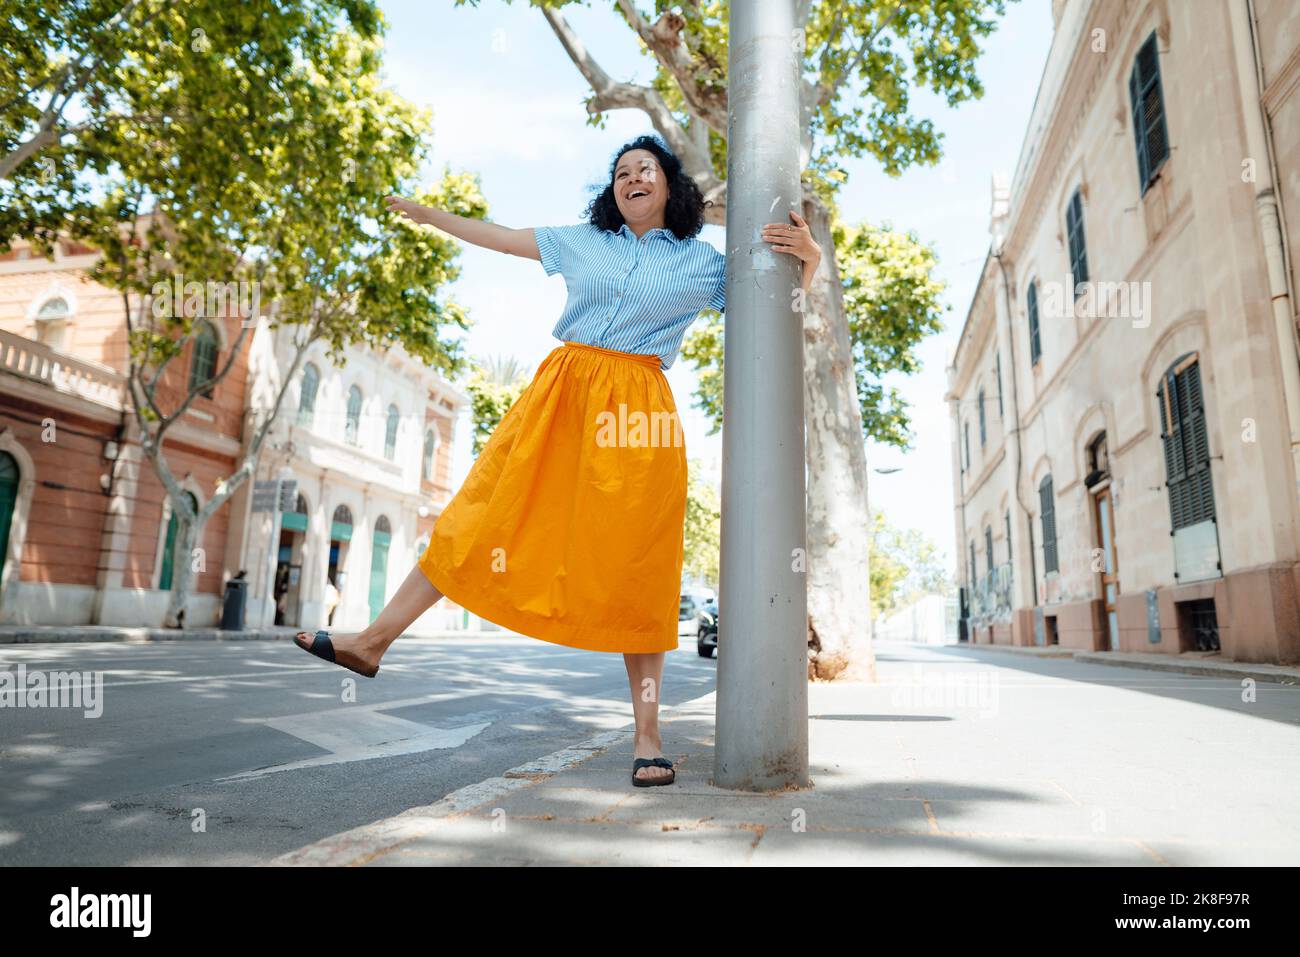 Playful woman holding pole dancing on sidewalk in city Stock Photo